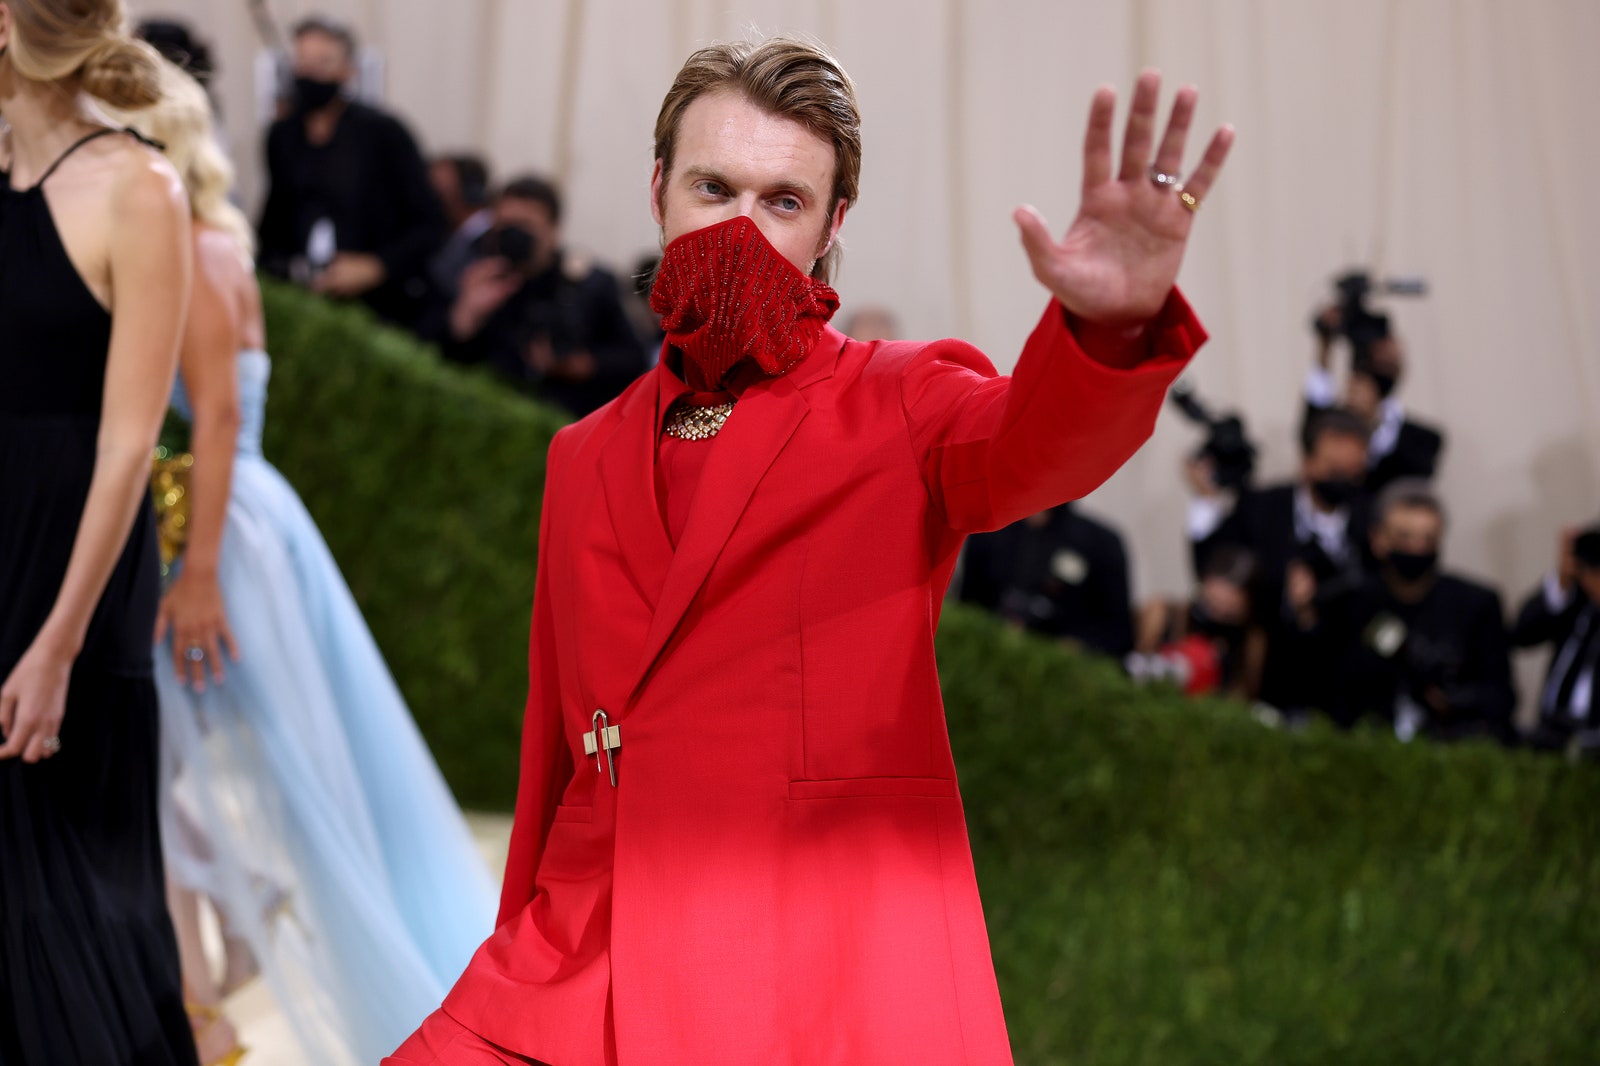 NEW YORK NEW YORK SEPTEMBER 13 Finneas OConnell attends The 2021 Met Gala Celebrating In America A Lexicon Of Fashion...